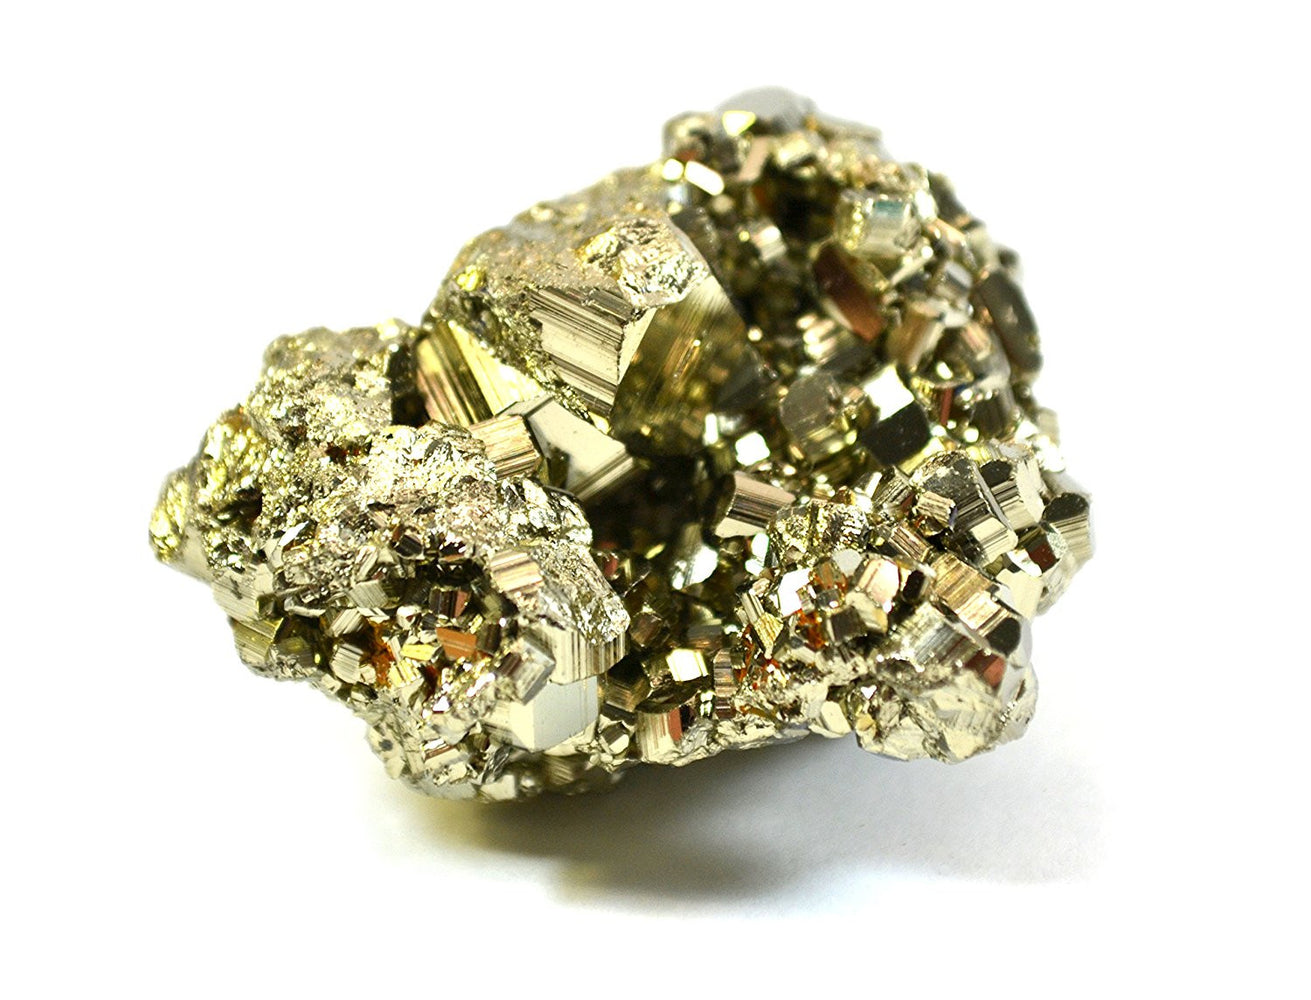 Crystalline Pyrite, Approximately 1.5"-2" Length, 2-10mm Crystals, Single Piece